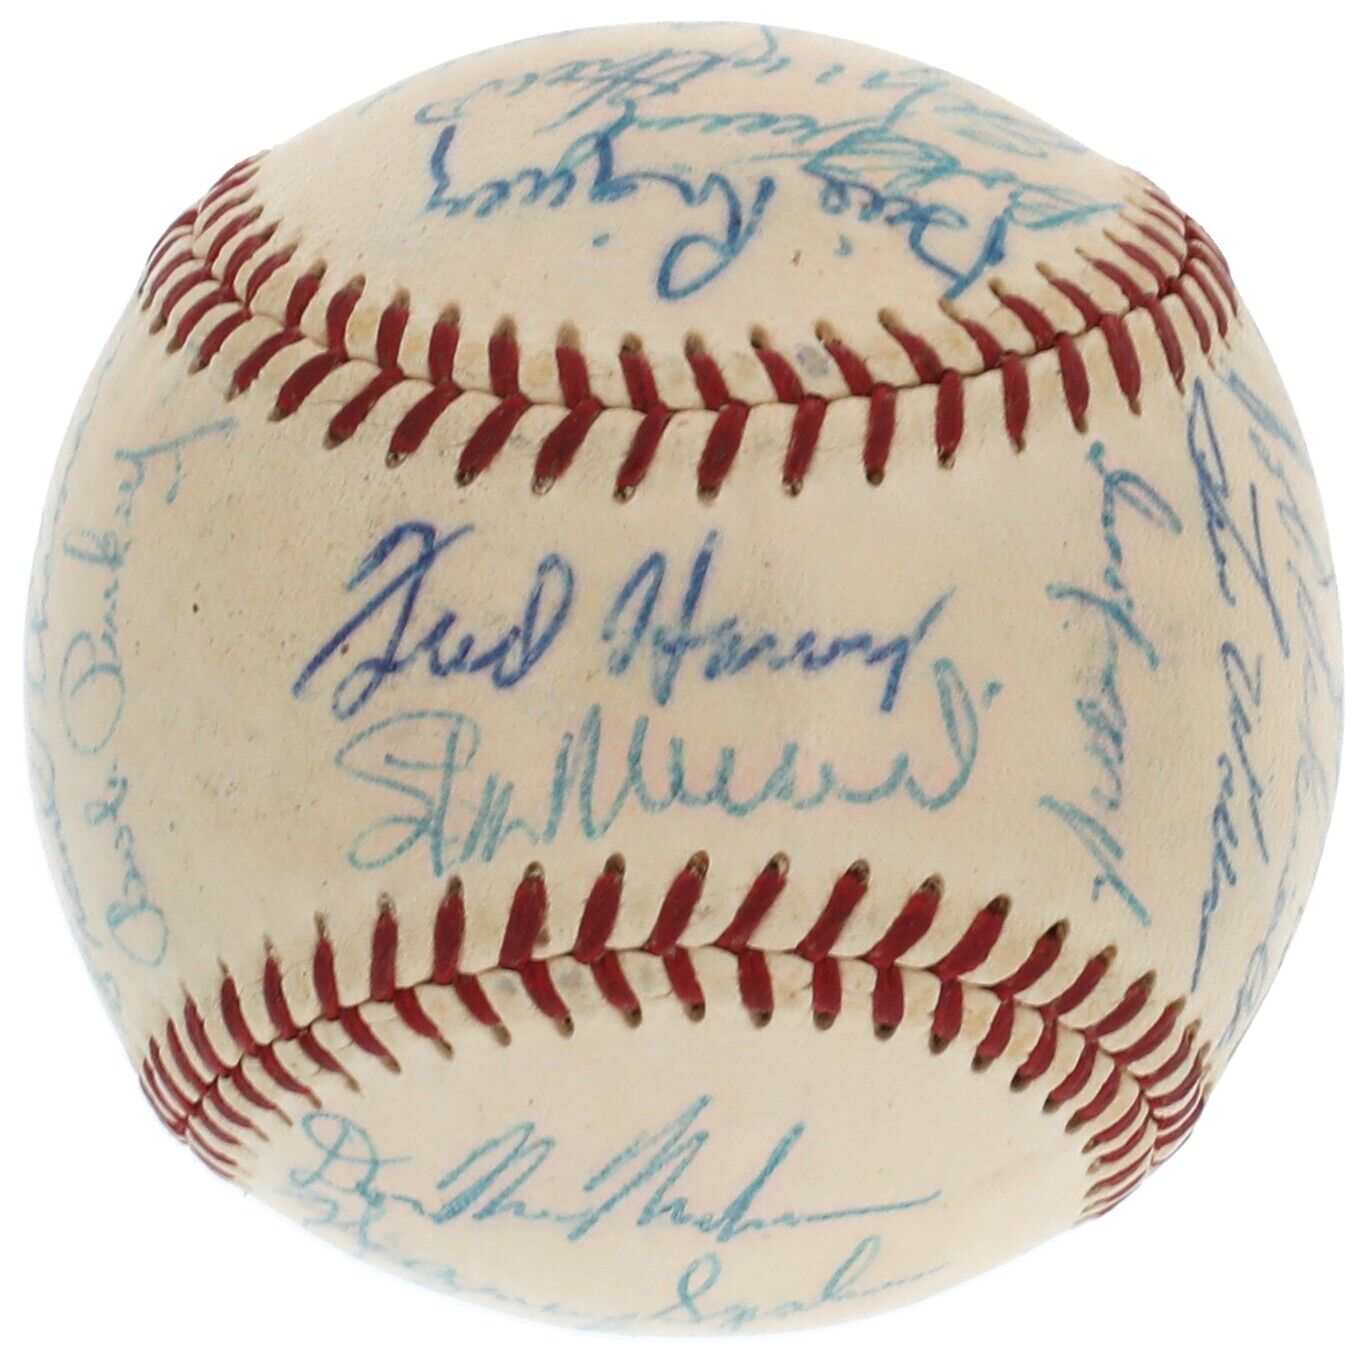 Willie Mays Stan Musial Signed 1958 All Star Game Team Signed Baseball JSA COA